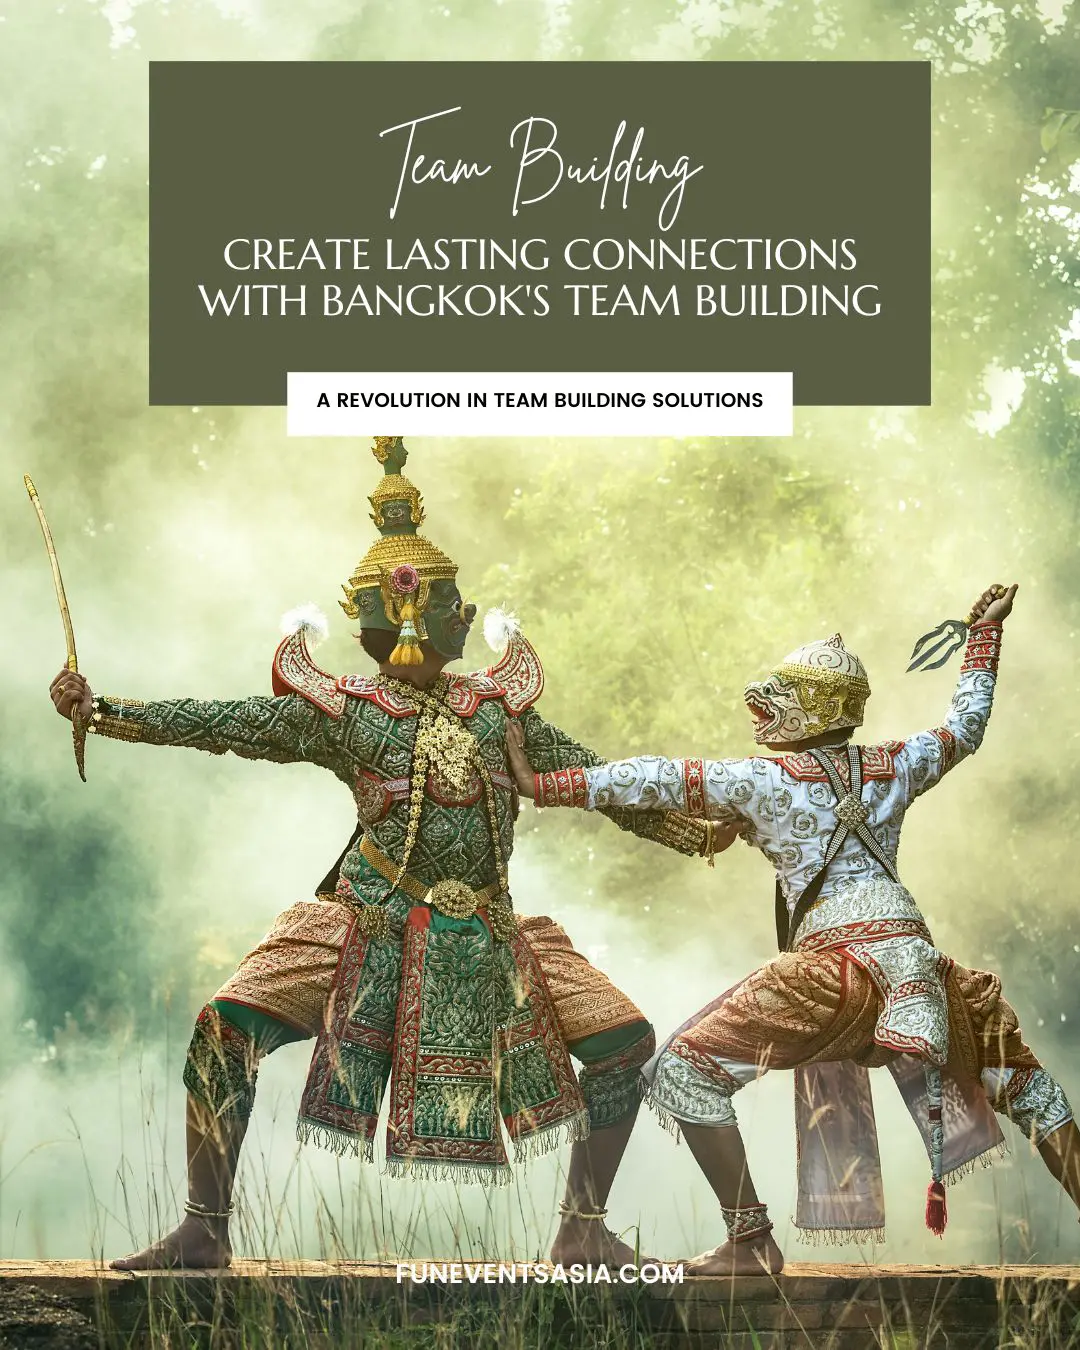 Create Lasting Connections with Bangkok's Team Building